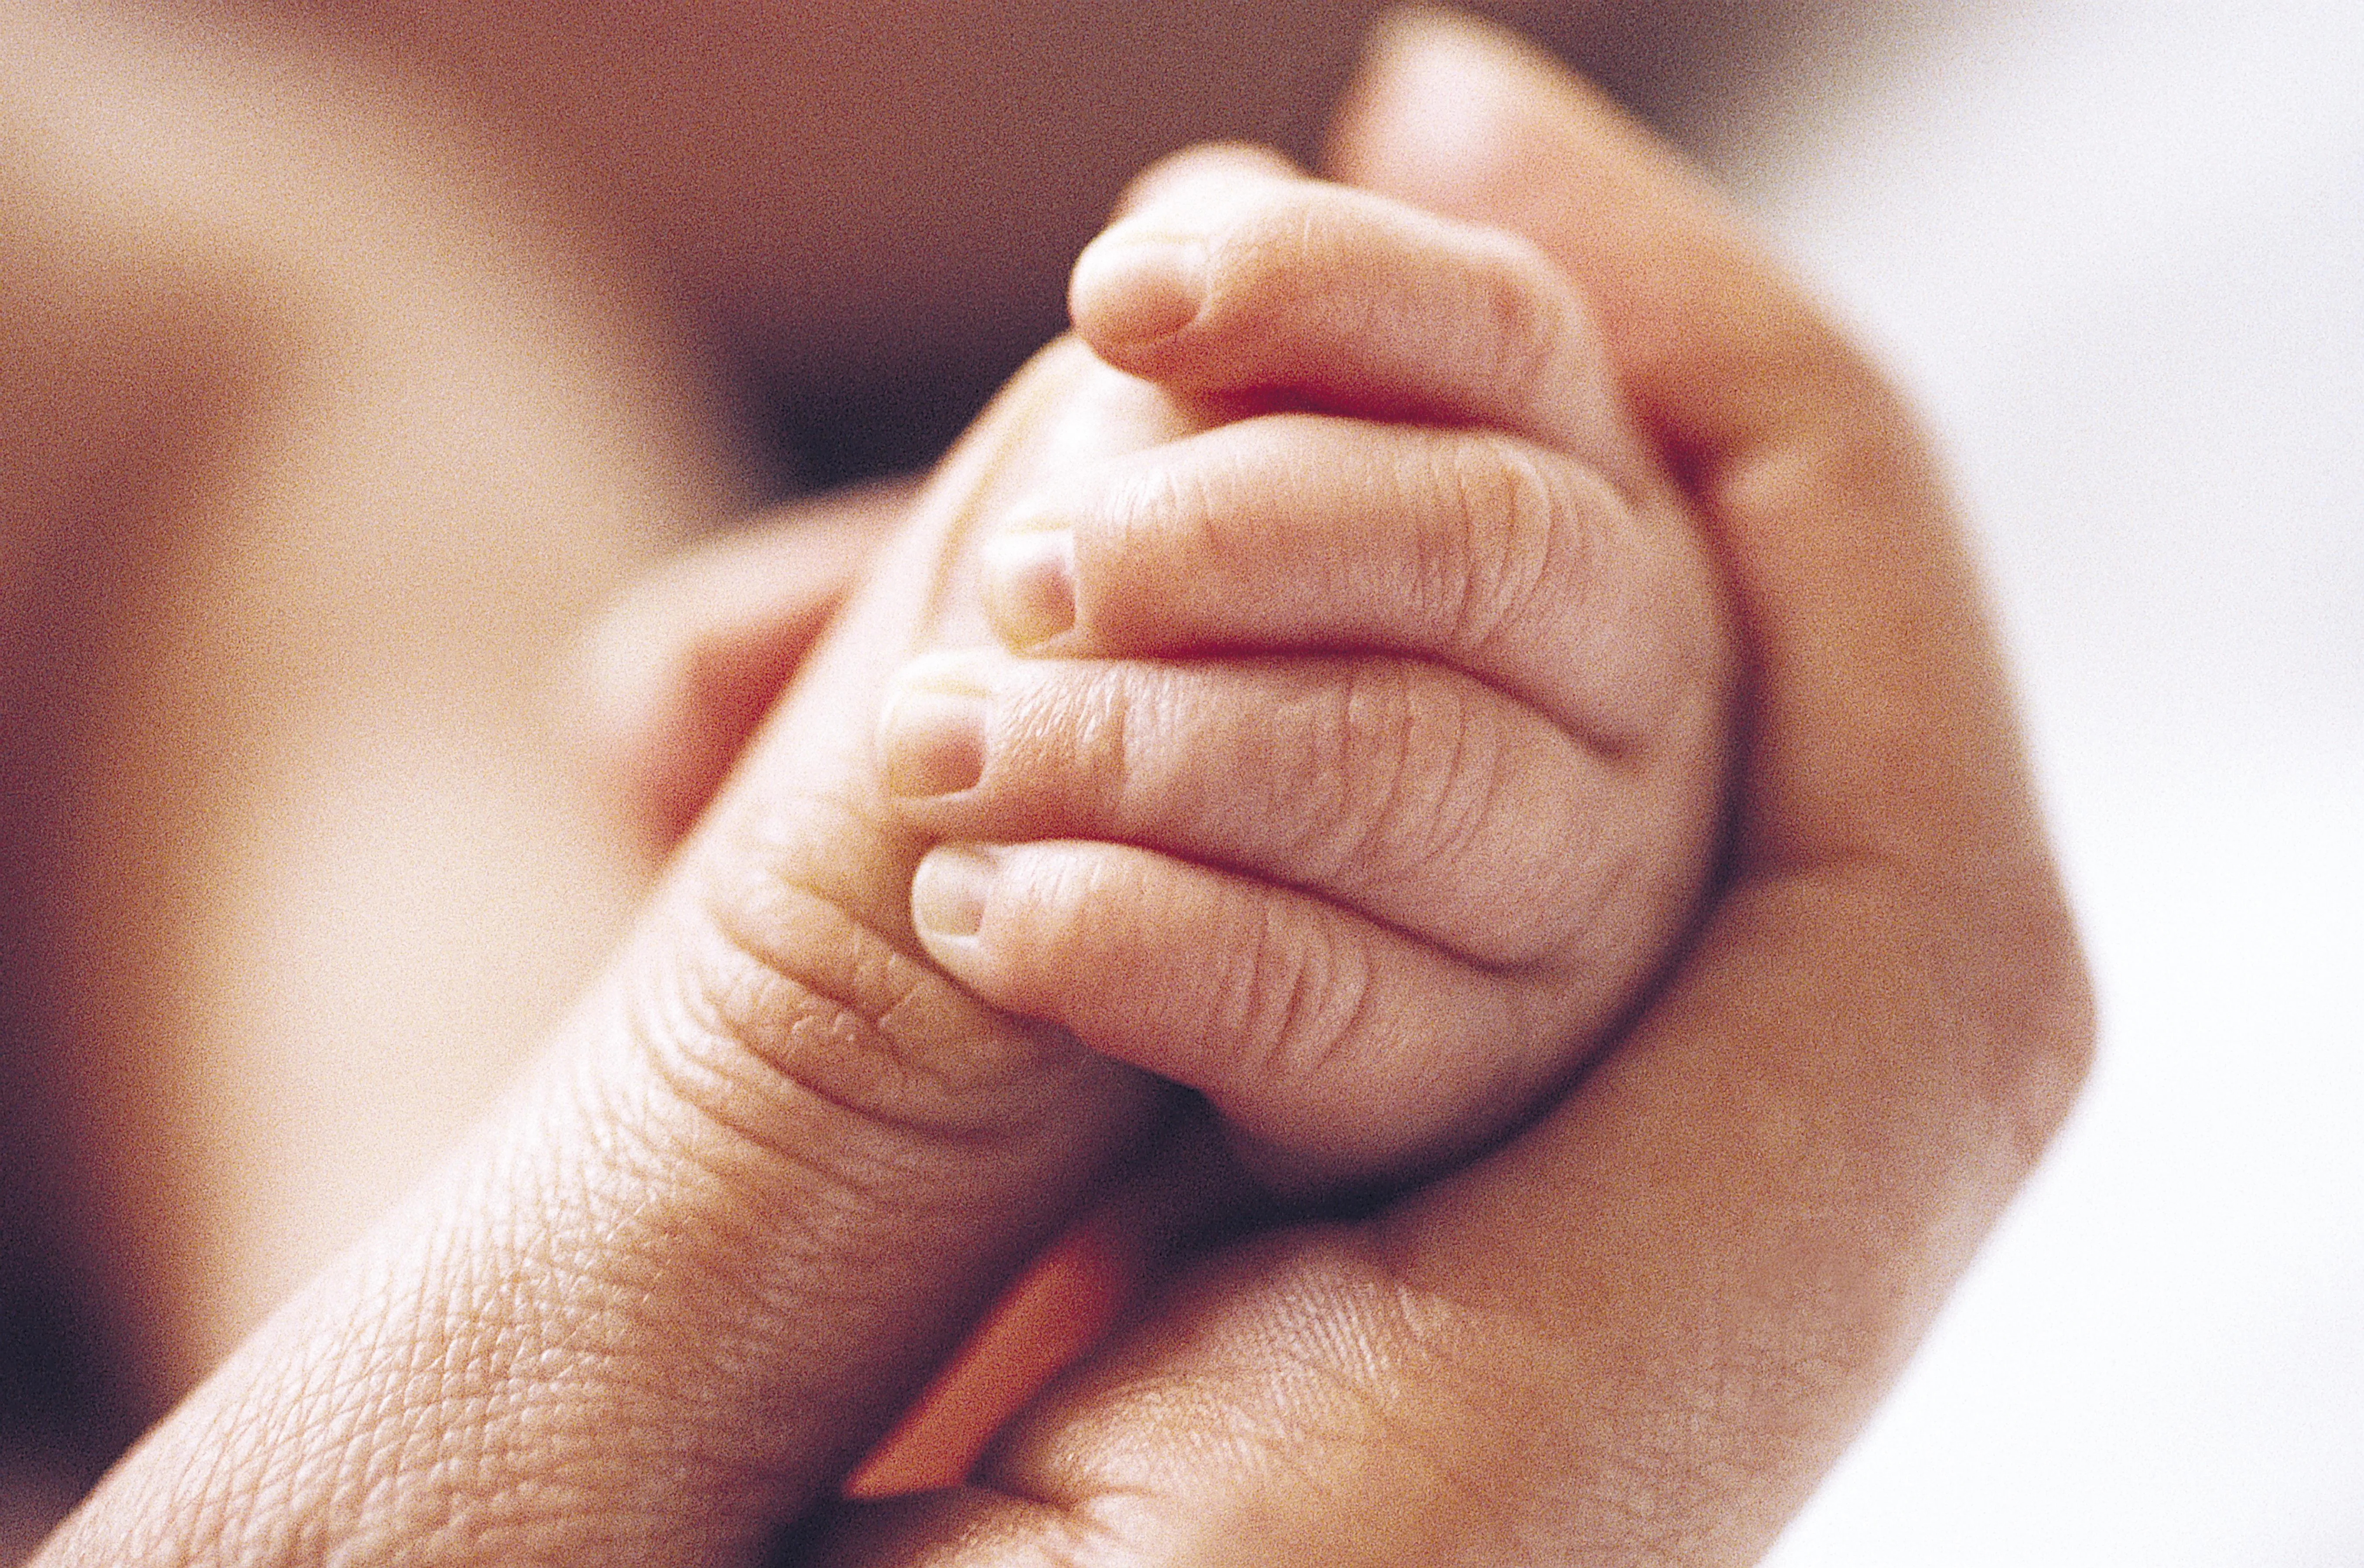 Baby holding parent's thumb